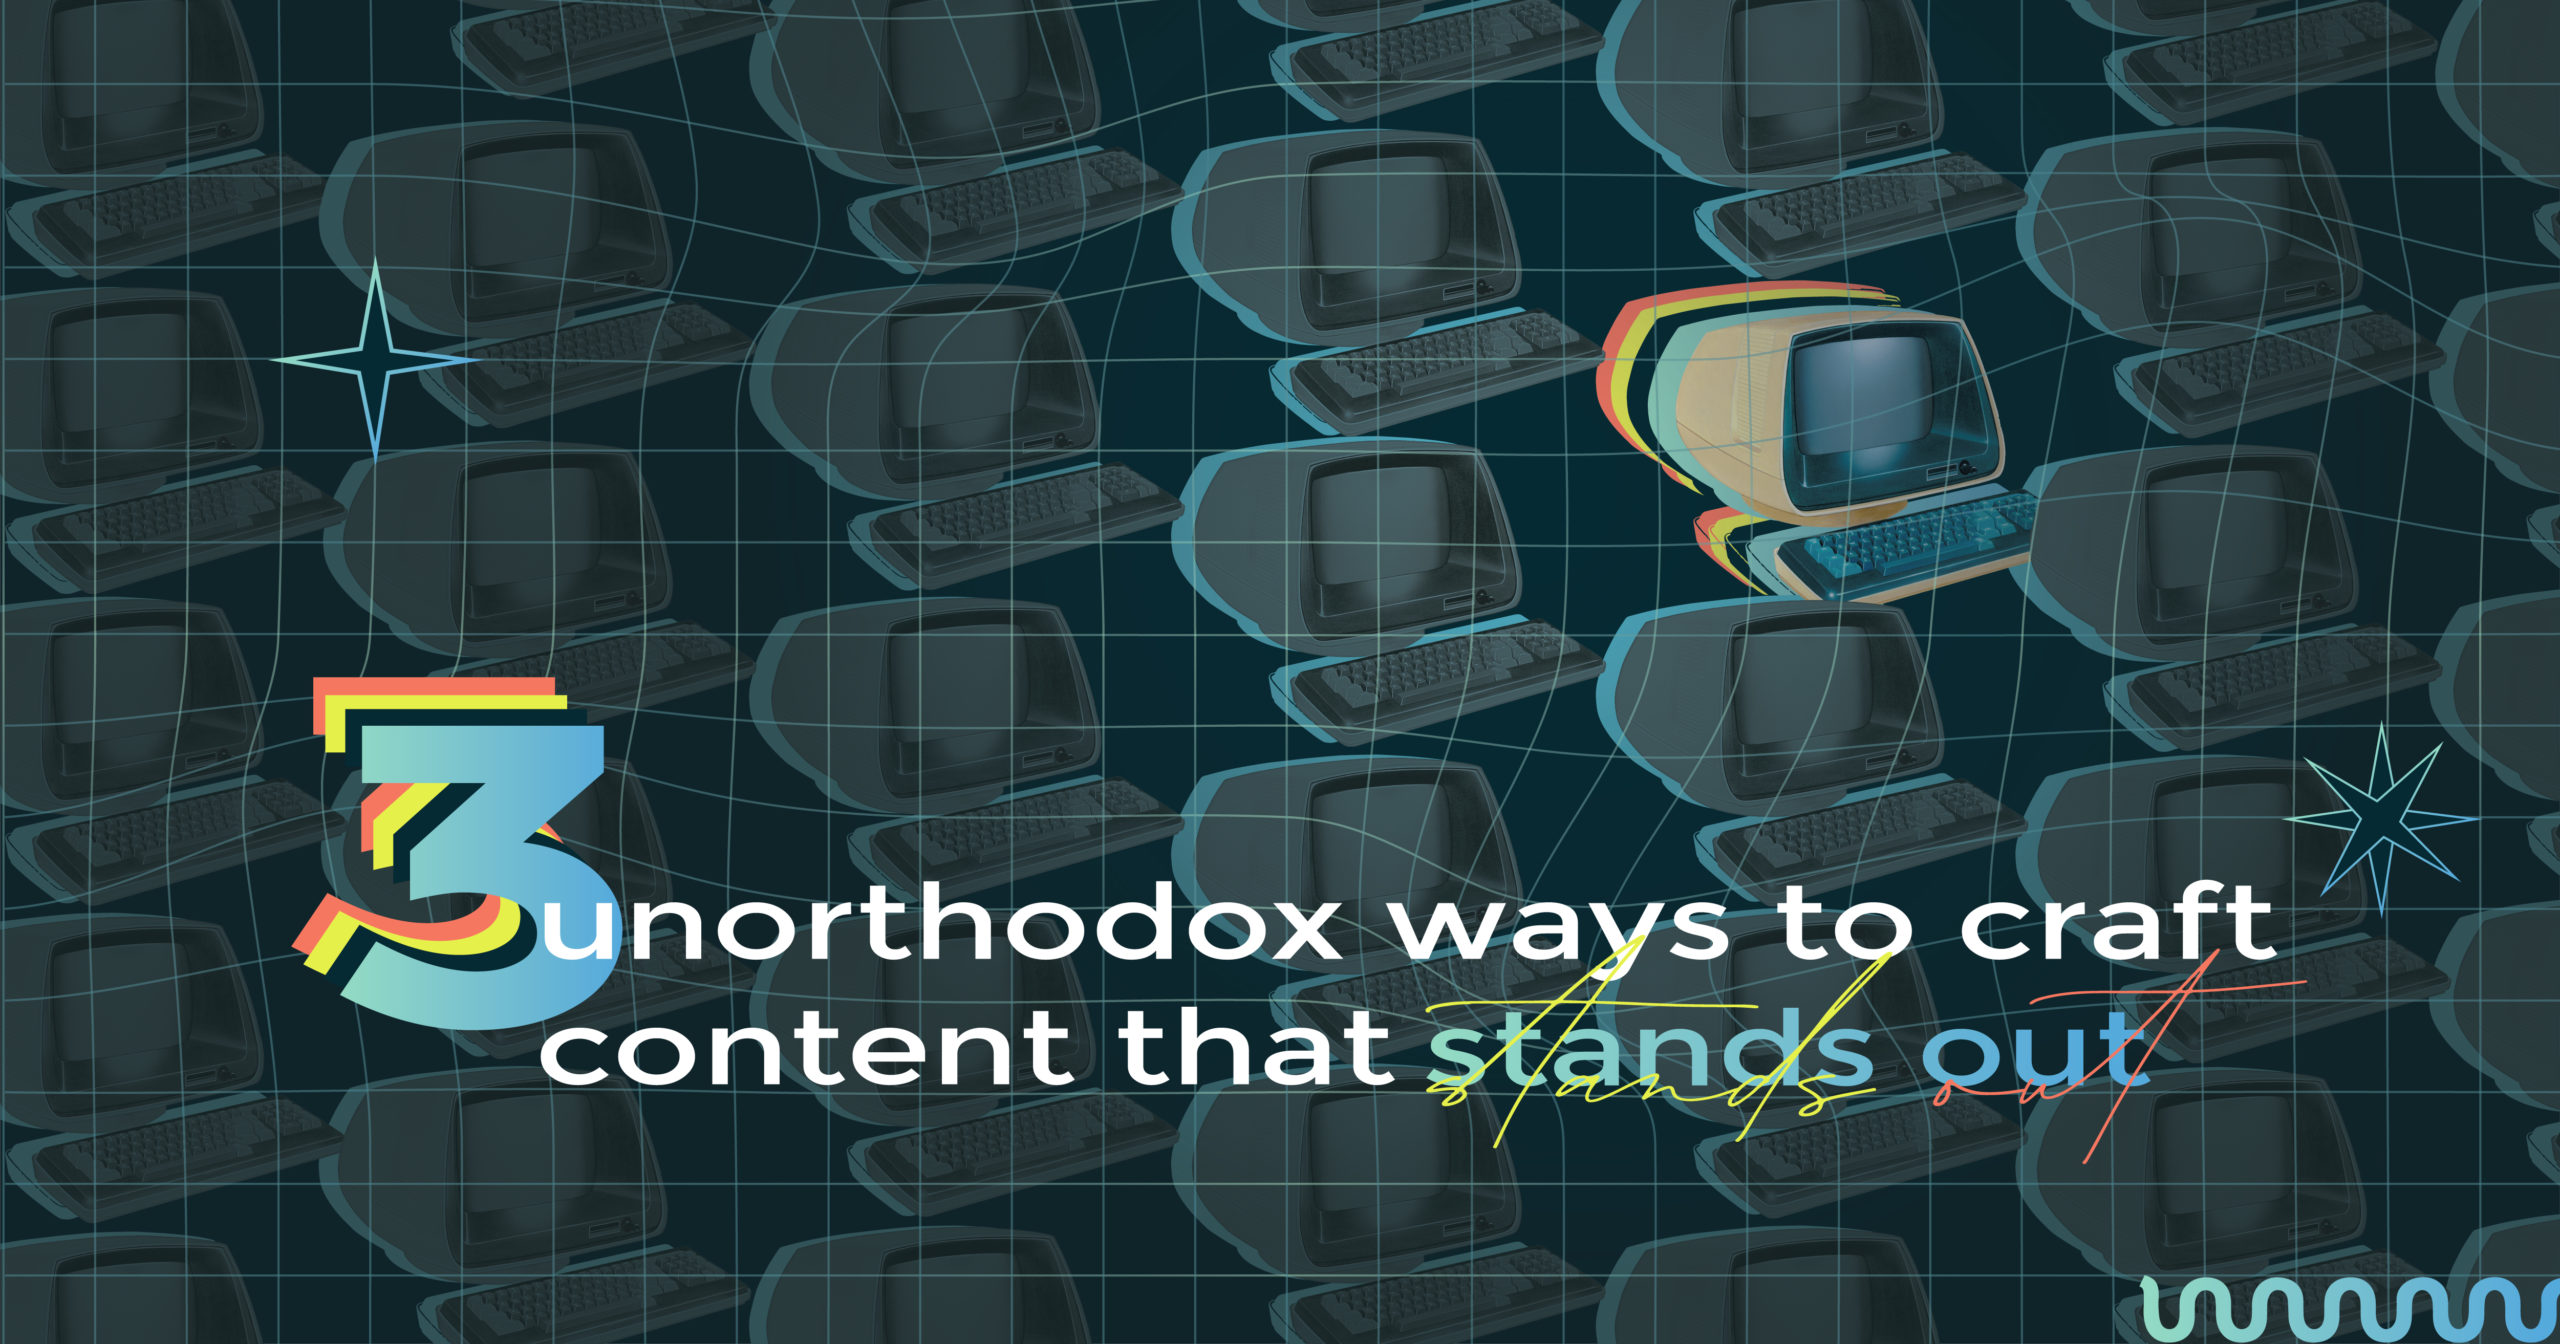 3 Unorthodox Ways to Craft Content that Stands Out